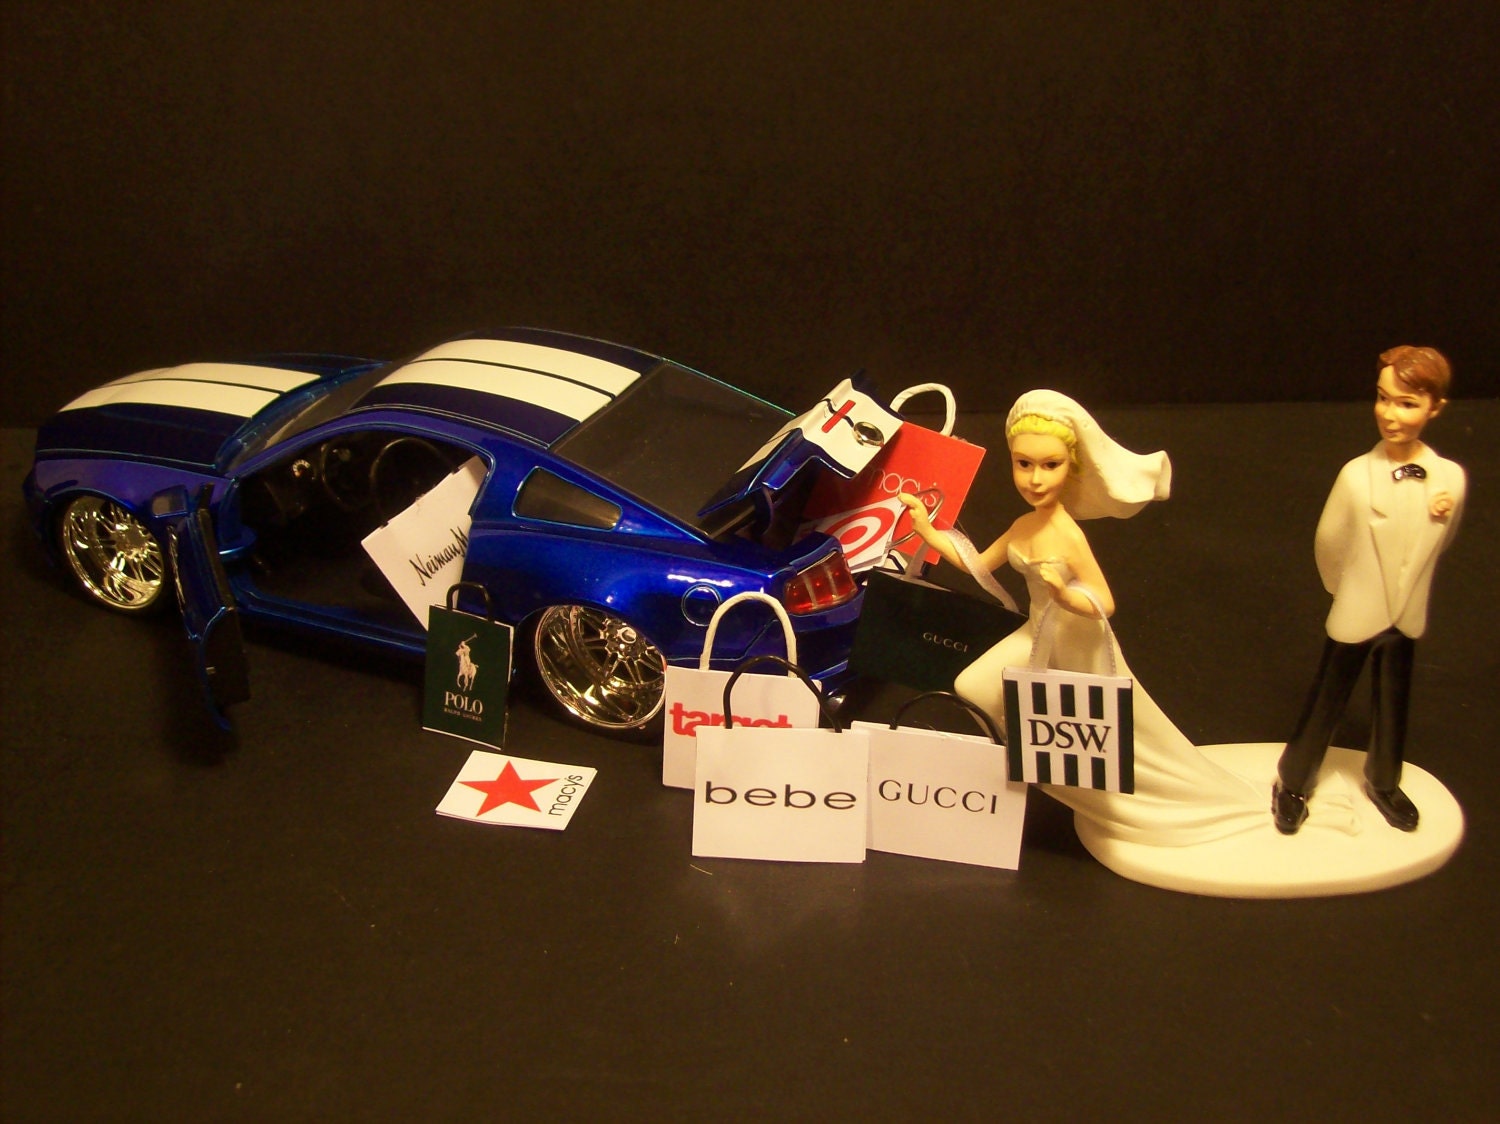 Bride Gone Shopping Funny Wedding Cake Topper Mustang GT From mikeg1968